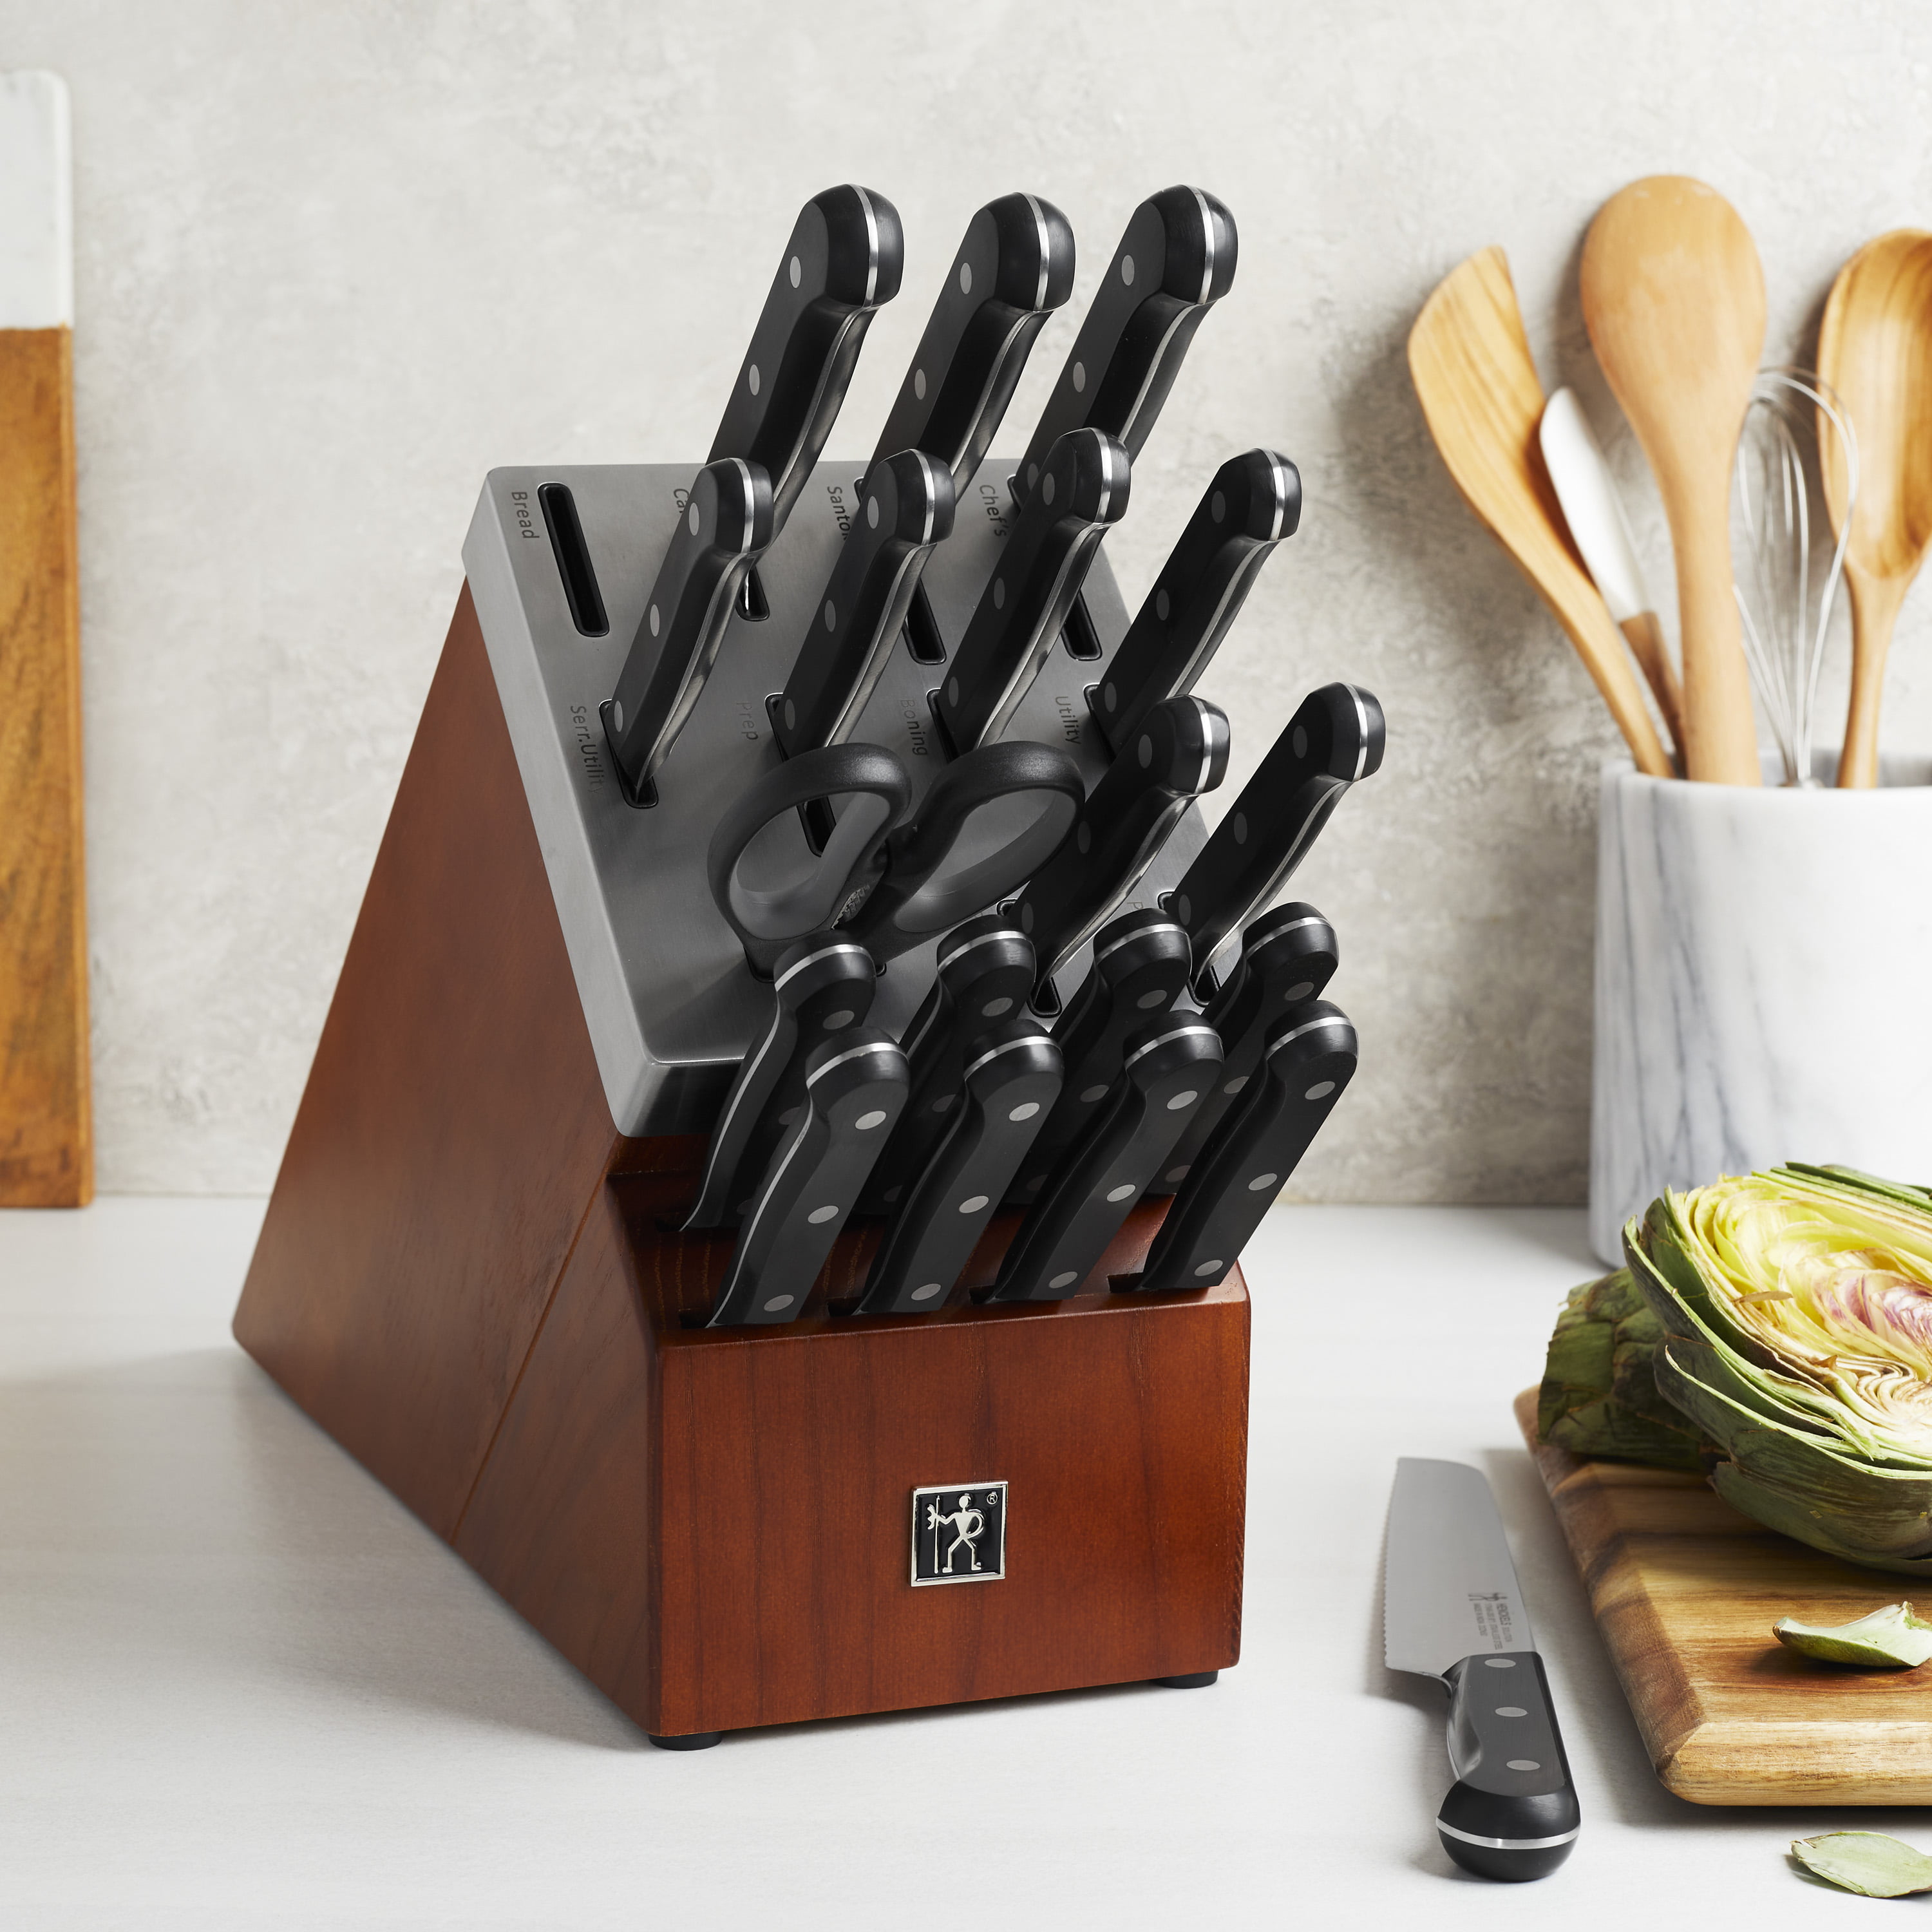  Henckels Forged Modernist 20 Piece Self Sharpening Knife Set  with Stainless Steel Handles & Black Knife Block: Home & Kitchen